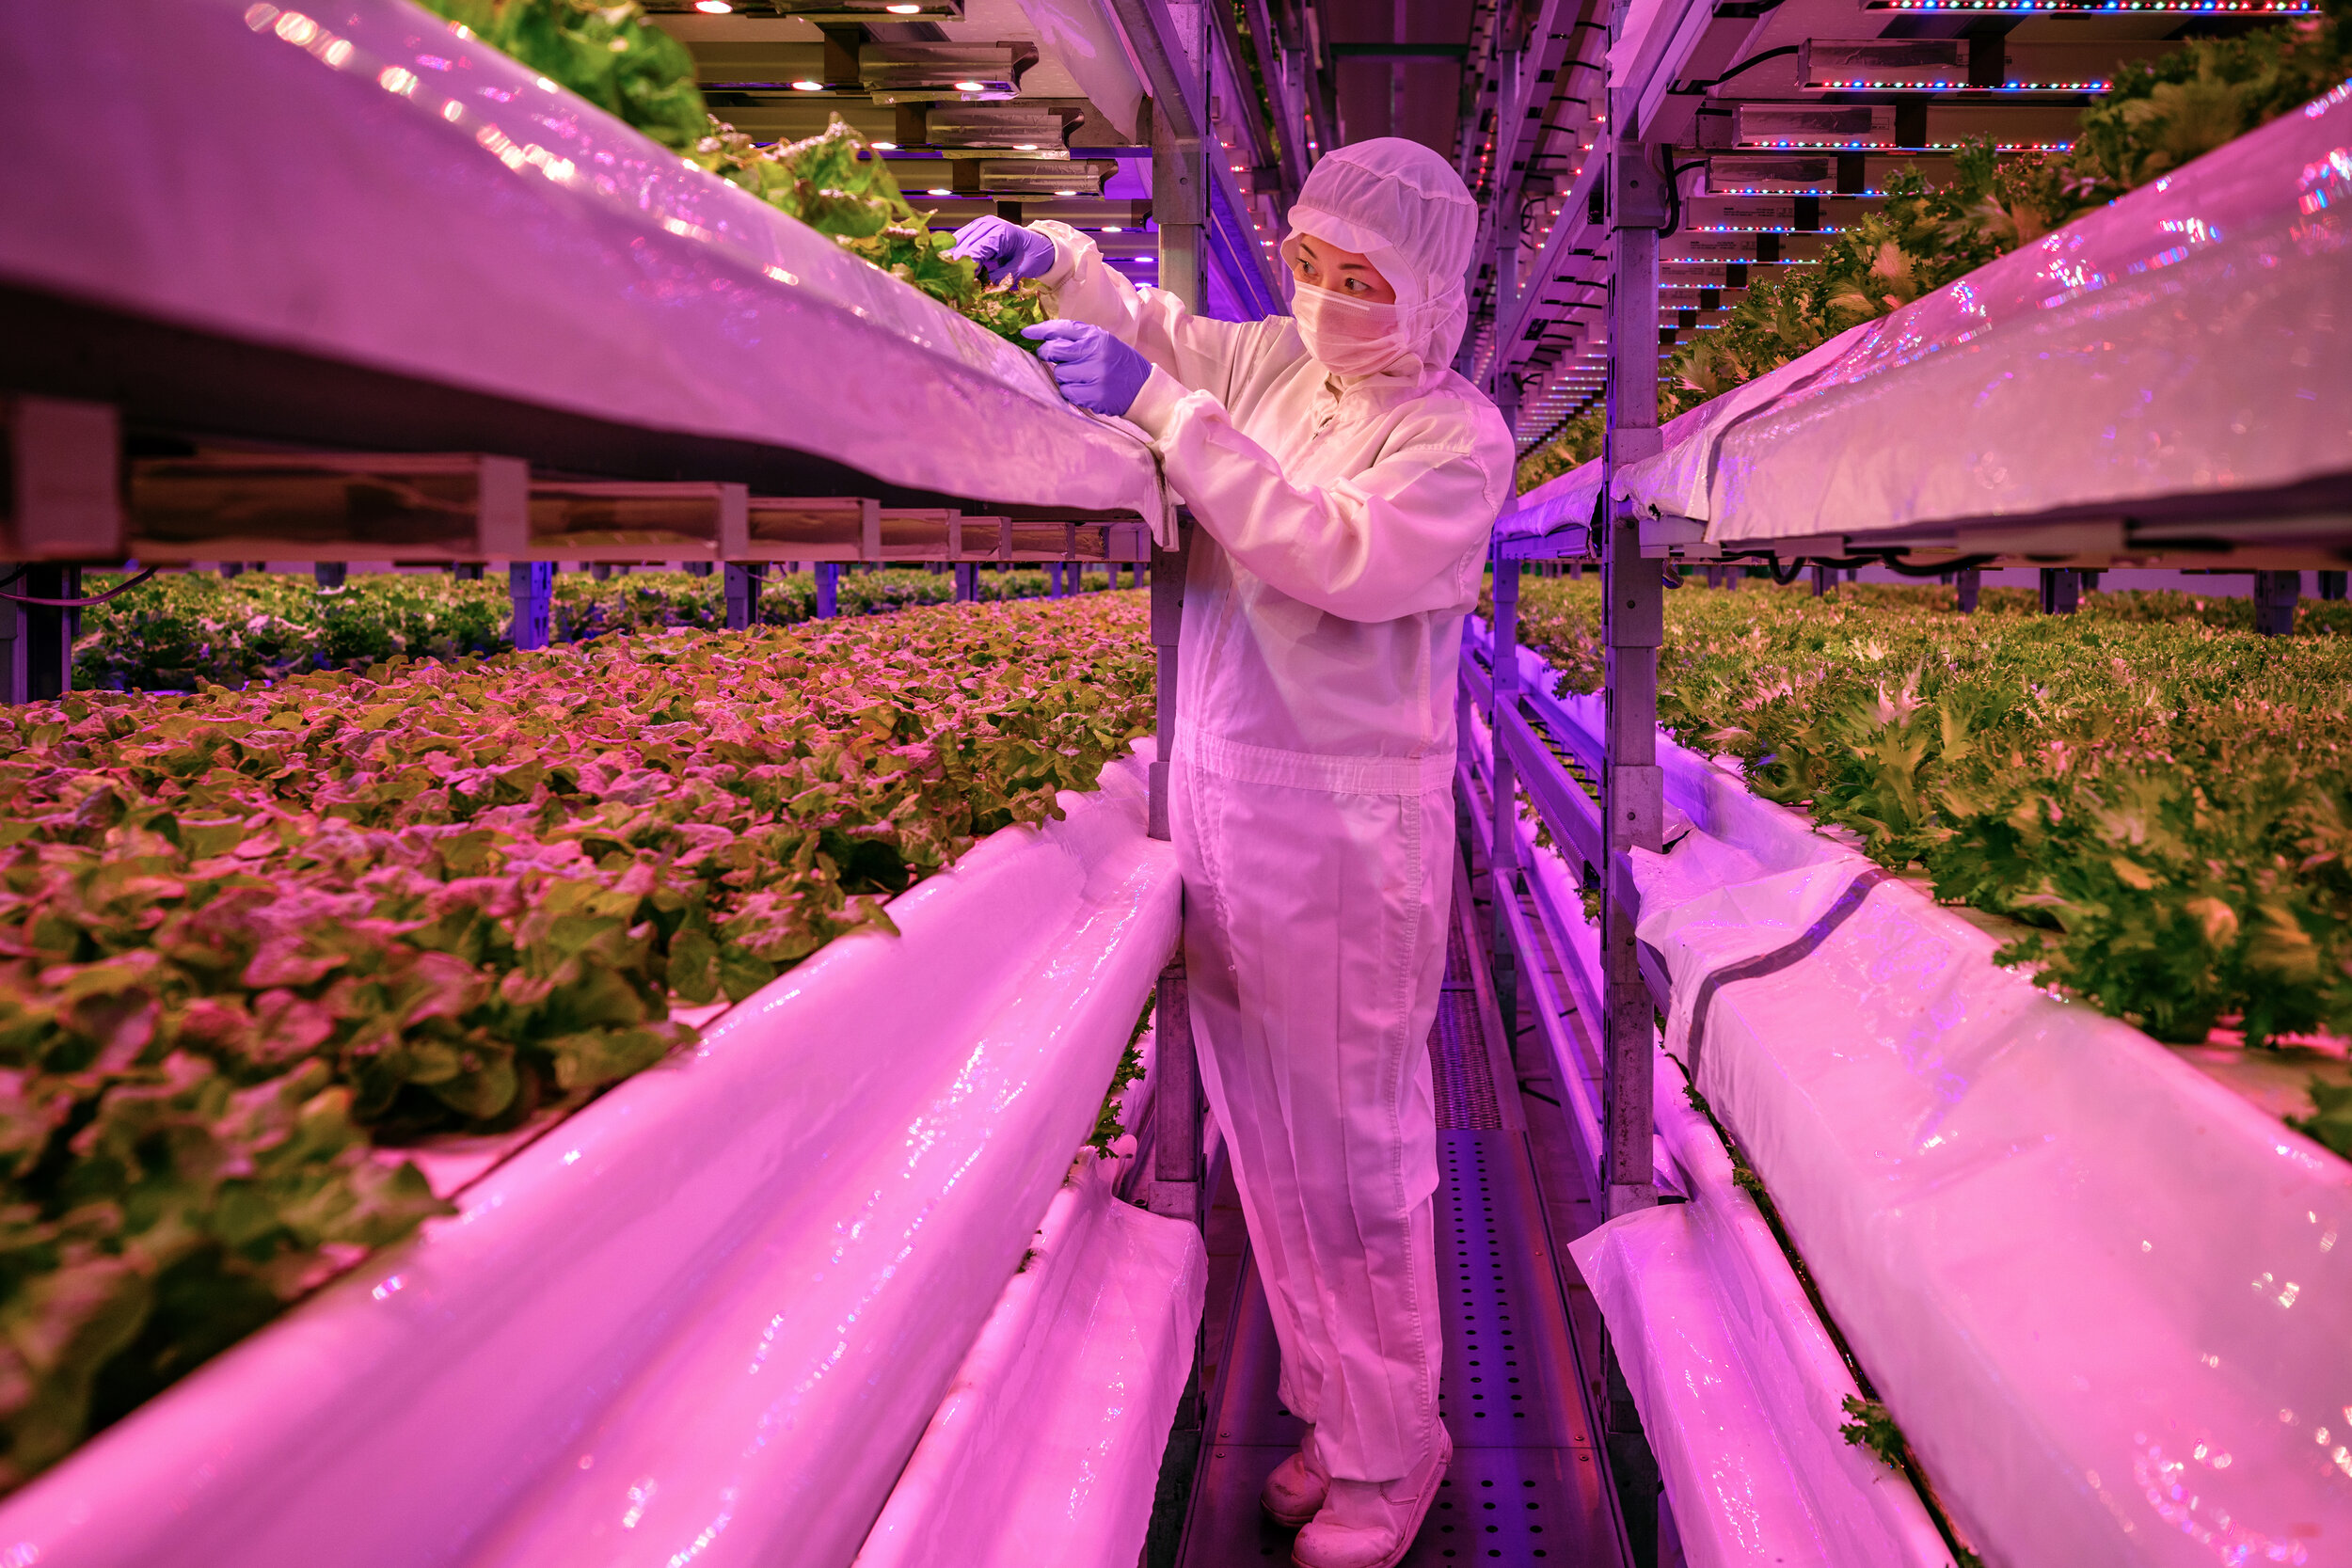  The vertical farm Innovatus is developing the food supply of the future through data-driven lettuce cultivation and tailor-made LED light recipes / Japan - 2019 